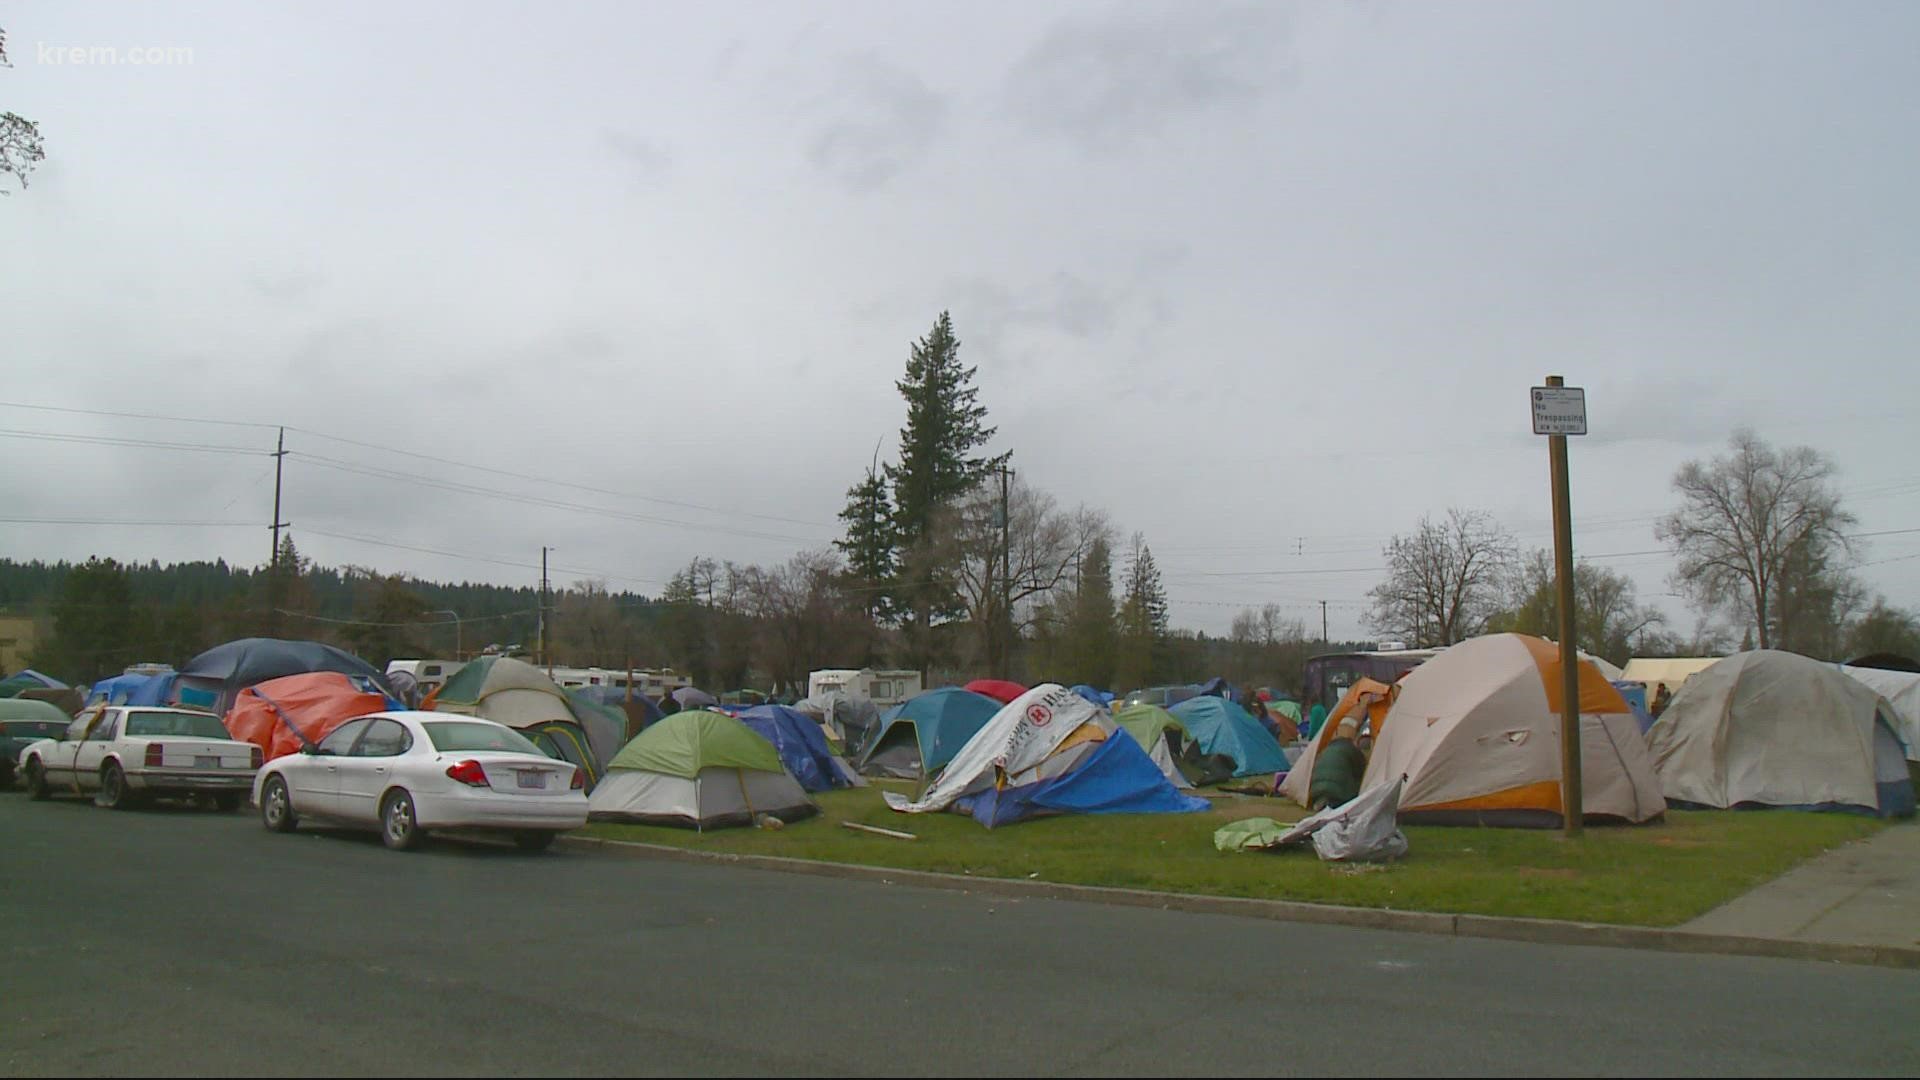 Spokane City Administrator Johnnie Perkins sent a letter to WSDOT on Thursday, stating the department has until Oct. 14 to clear the homeless encampment near I-90.